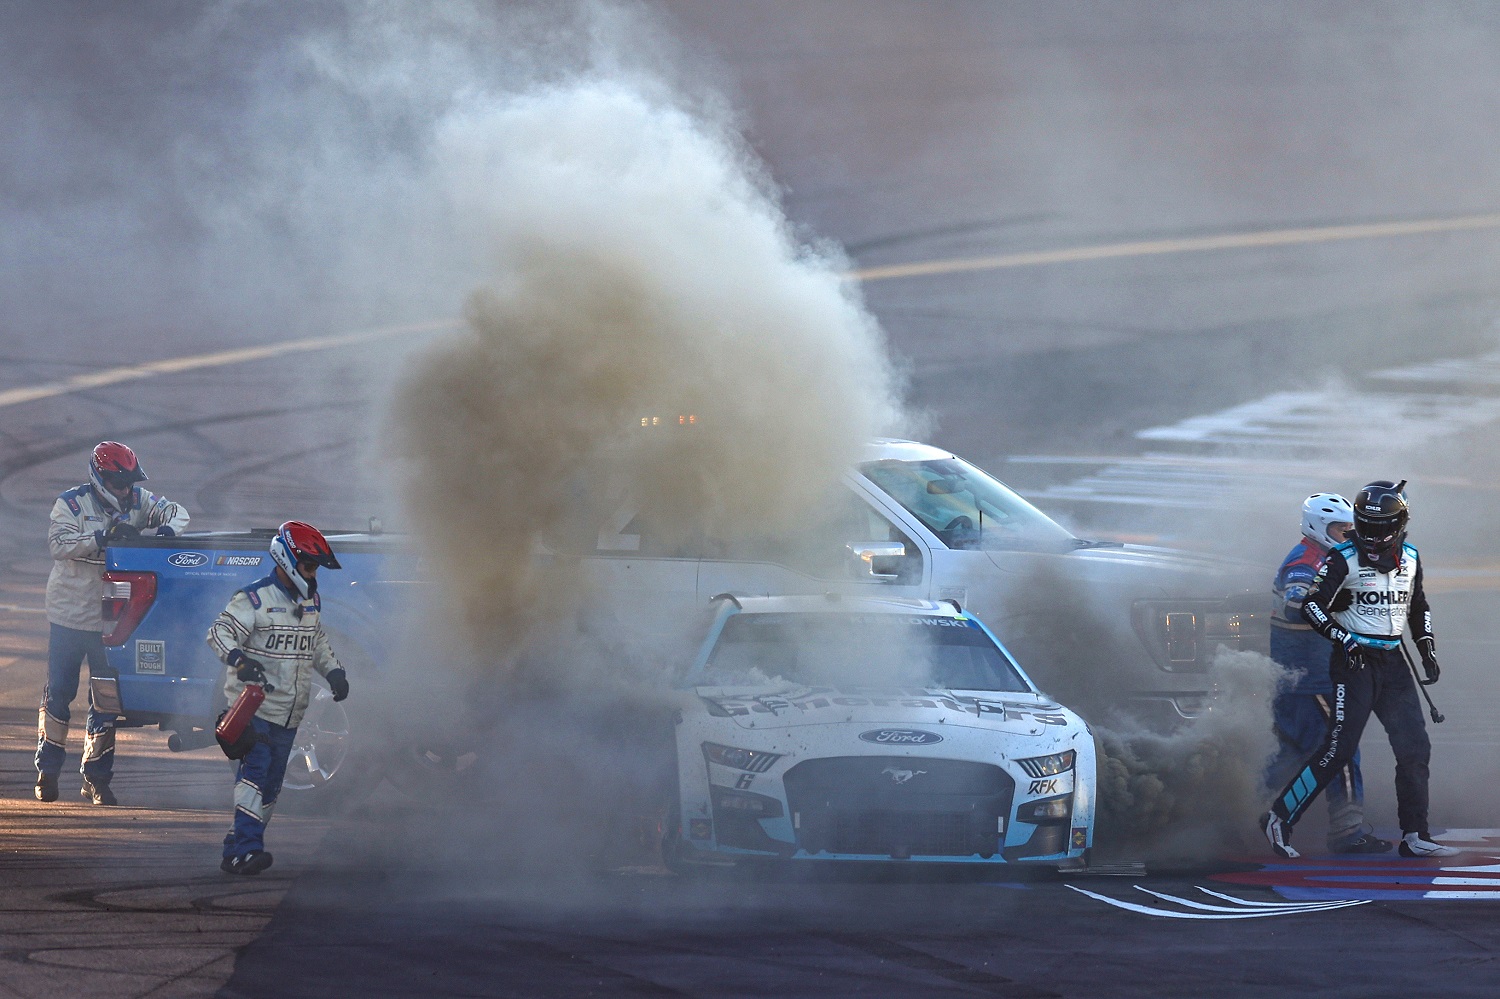 NASCAR safety crews arrive to extinguish flames from the No. 6 Ford as Brad Keselowski walks away after an on-track incident at Phoenix Raceway on Nov. 6, 2022.